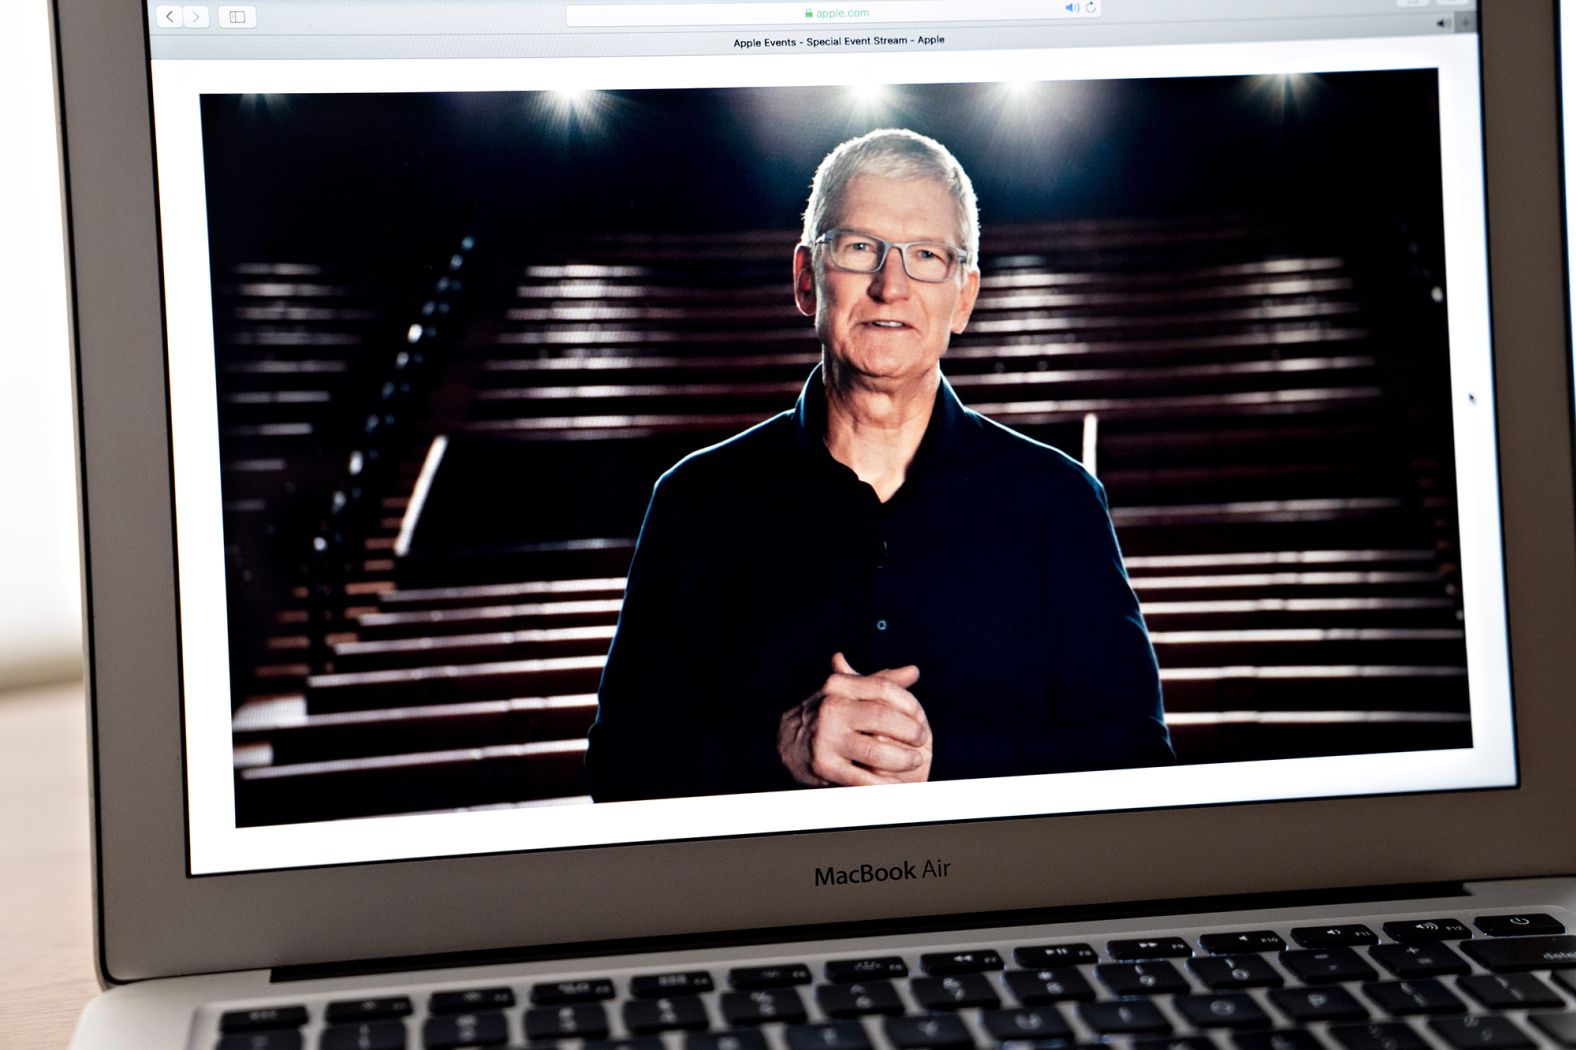 Cook is seen on a laptop as he speaks during the Apple Worldwide Developers Conference in June 2020. The conference was held remotely because of the coronavirus pandemic.